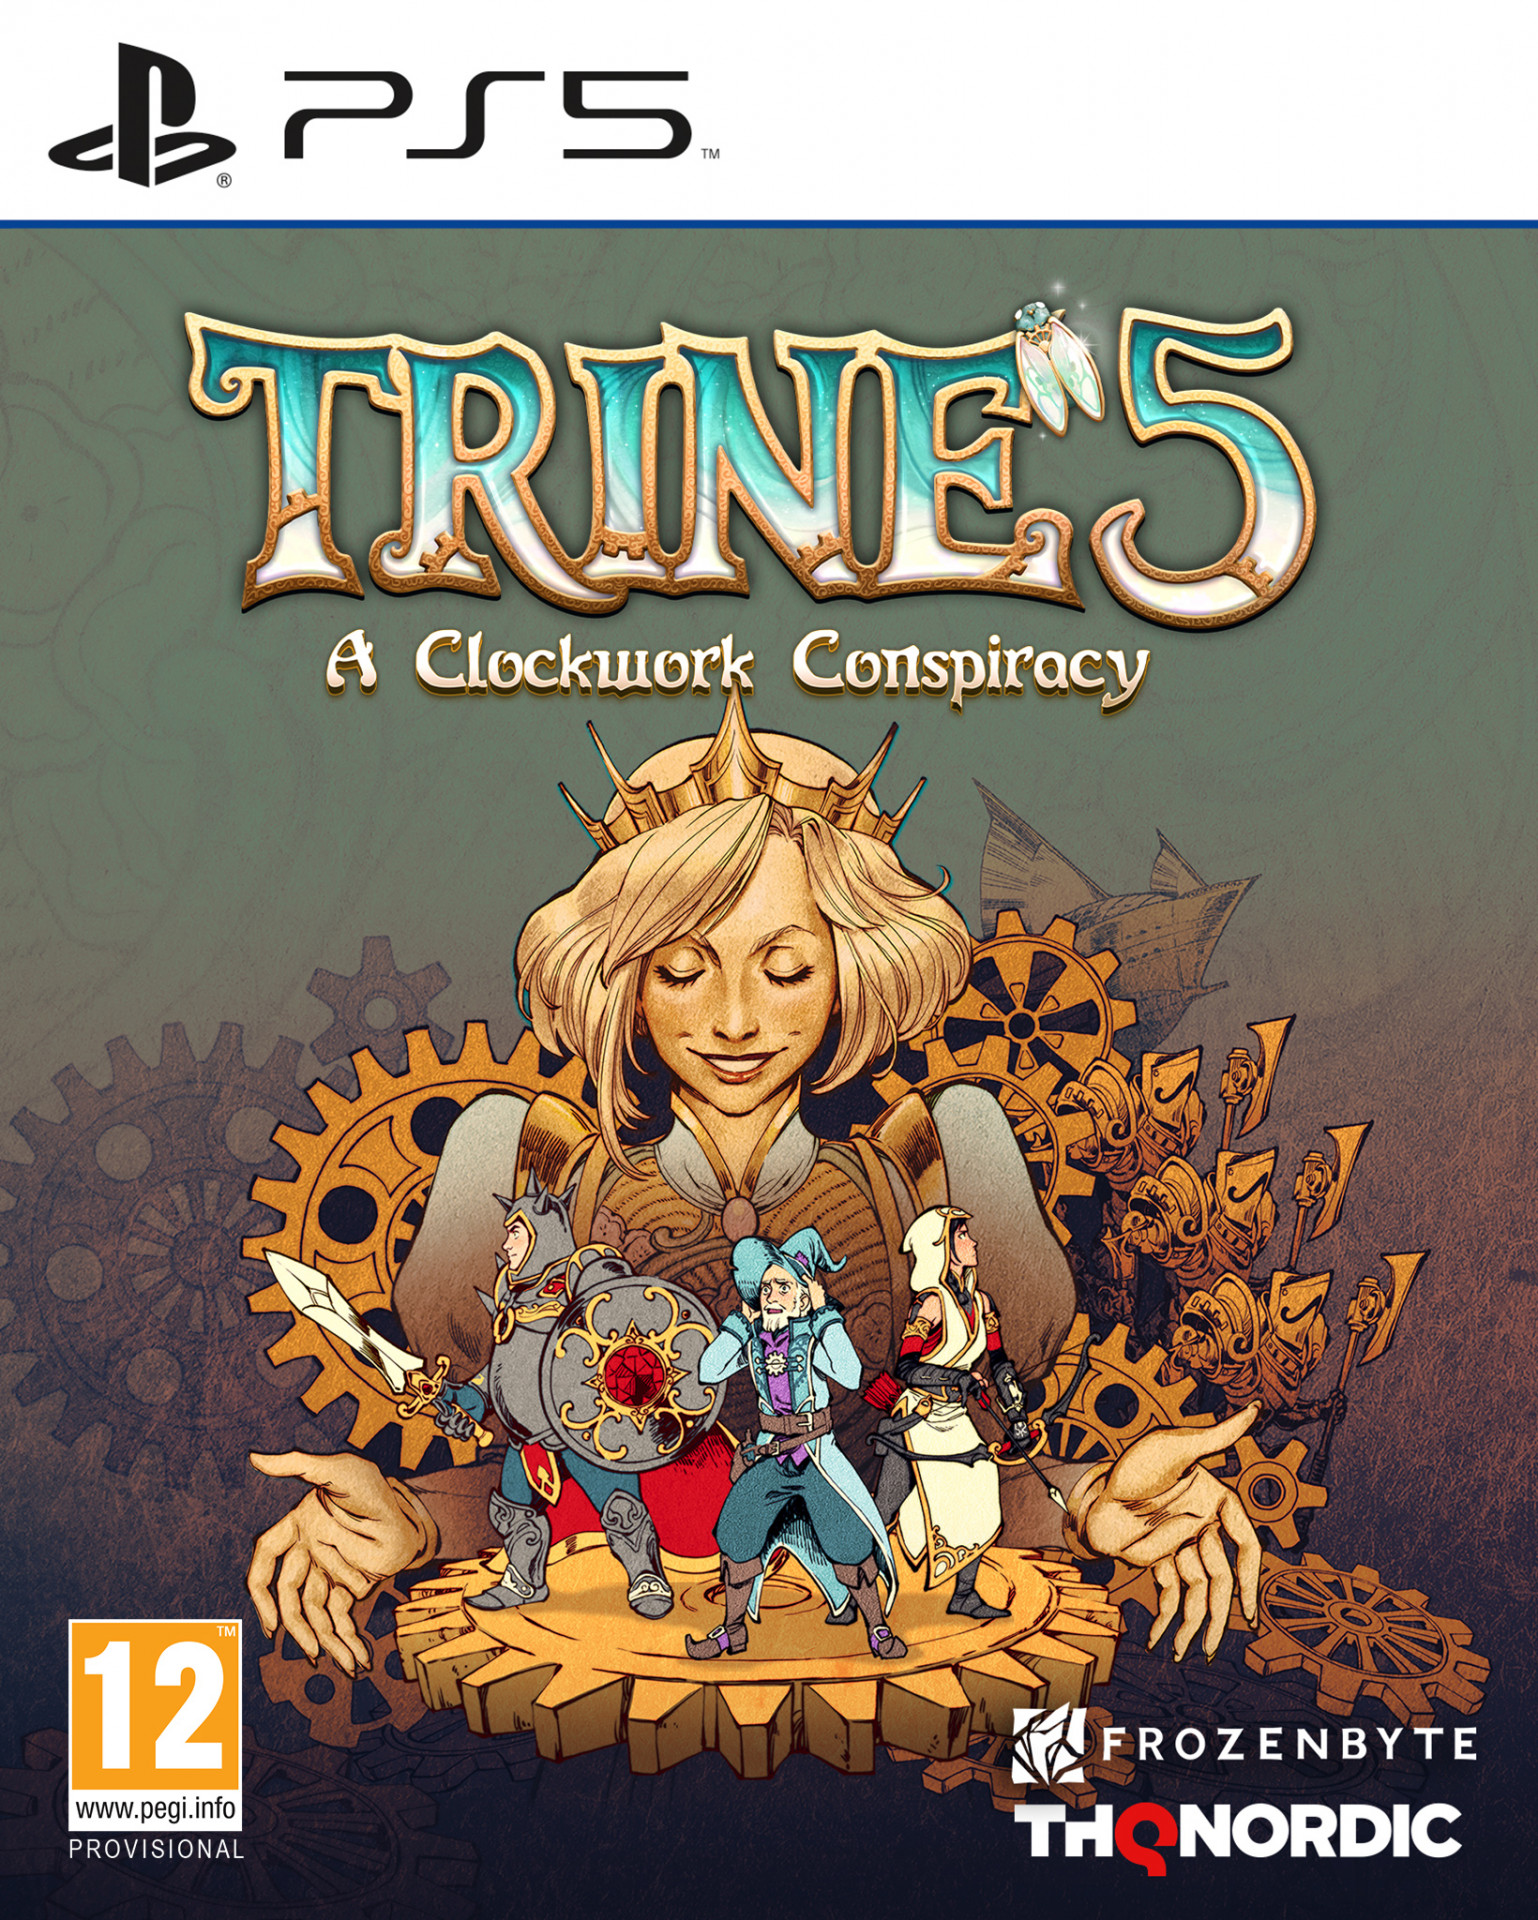 Trine 5: A Clockwork Conspiracy (PS5), THQ Nordic